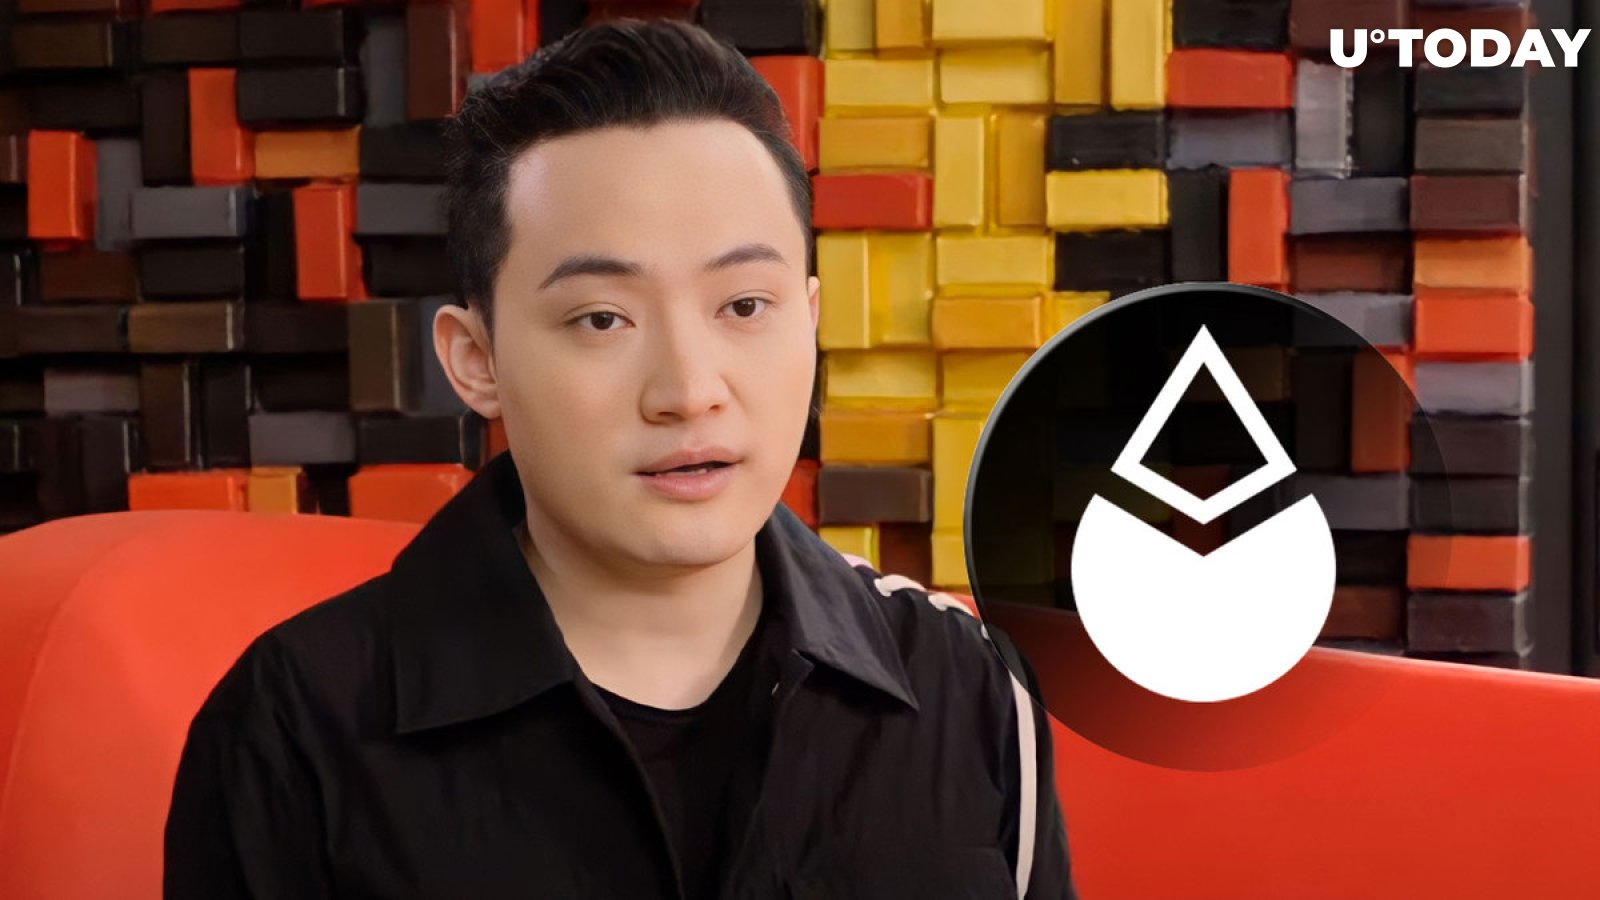 Tron (TRX) Founder Justin Sun Stakes 150,100 ETH in Lido Finance: Details